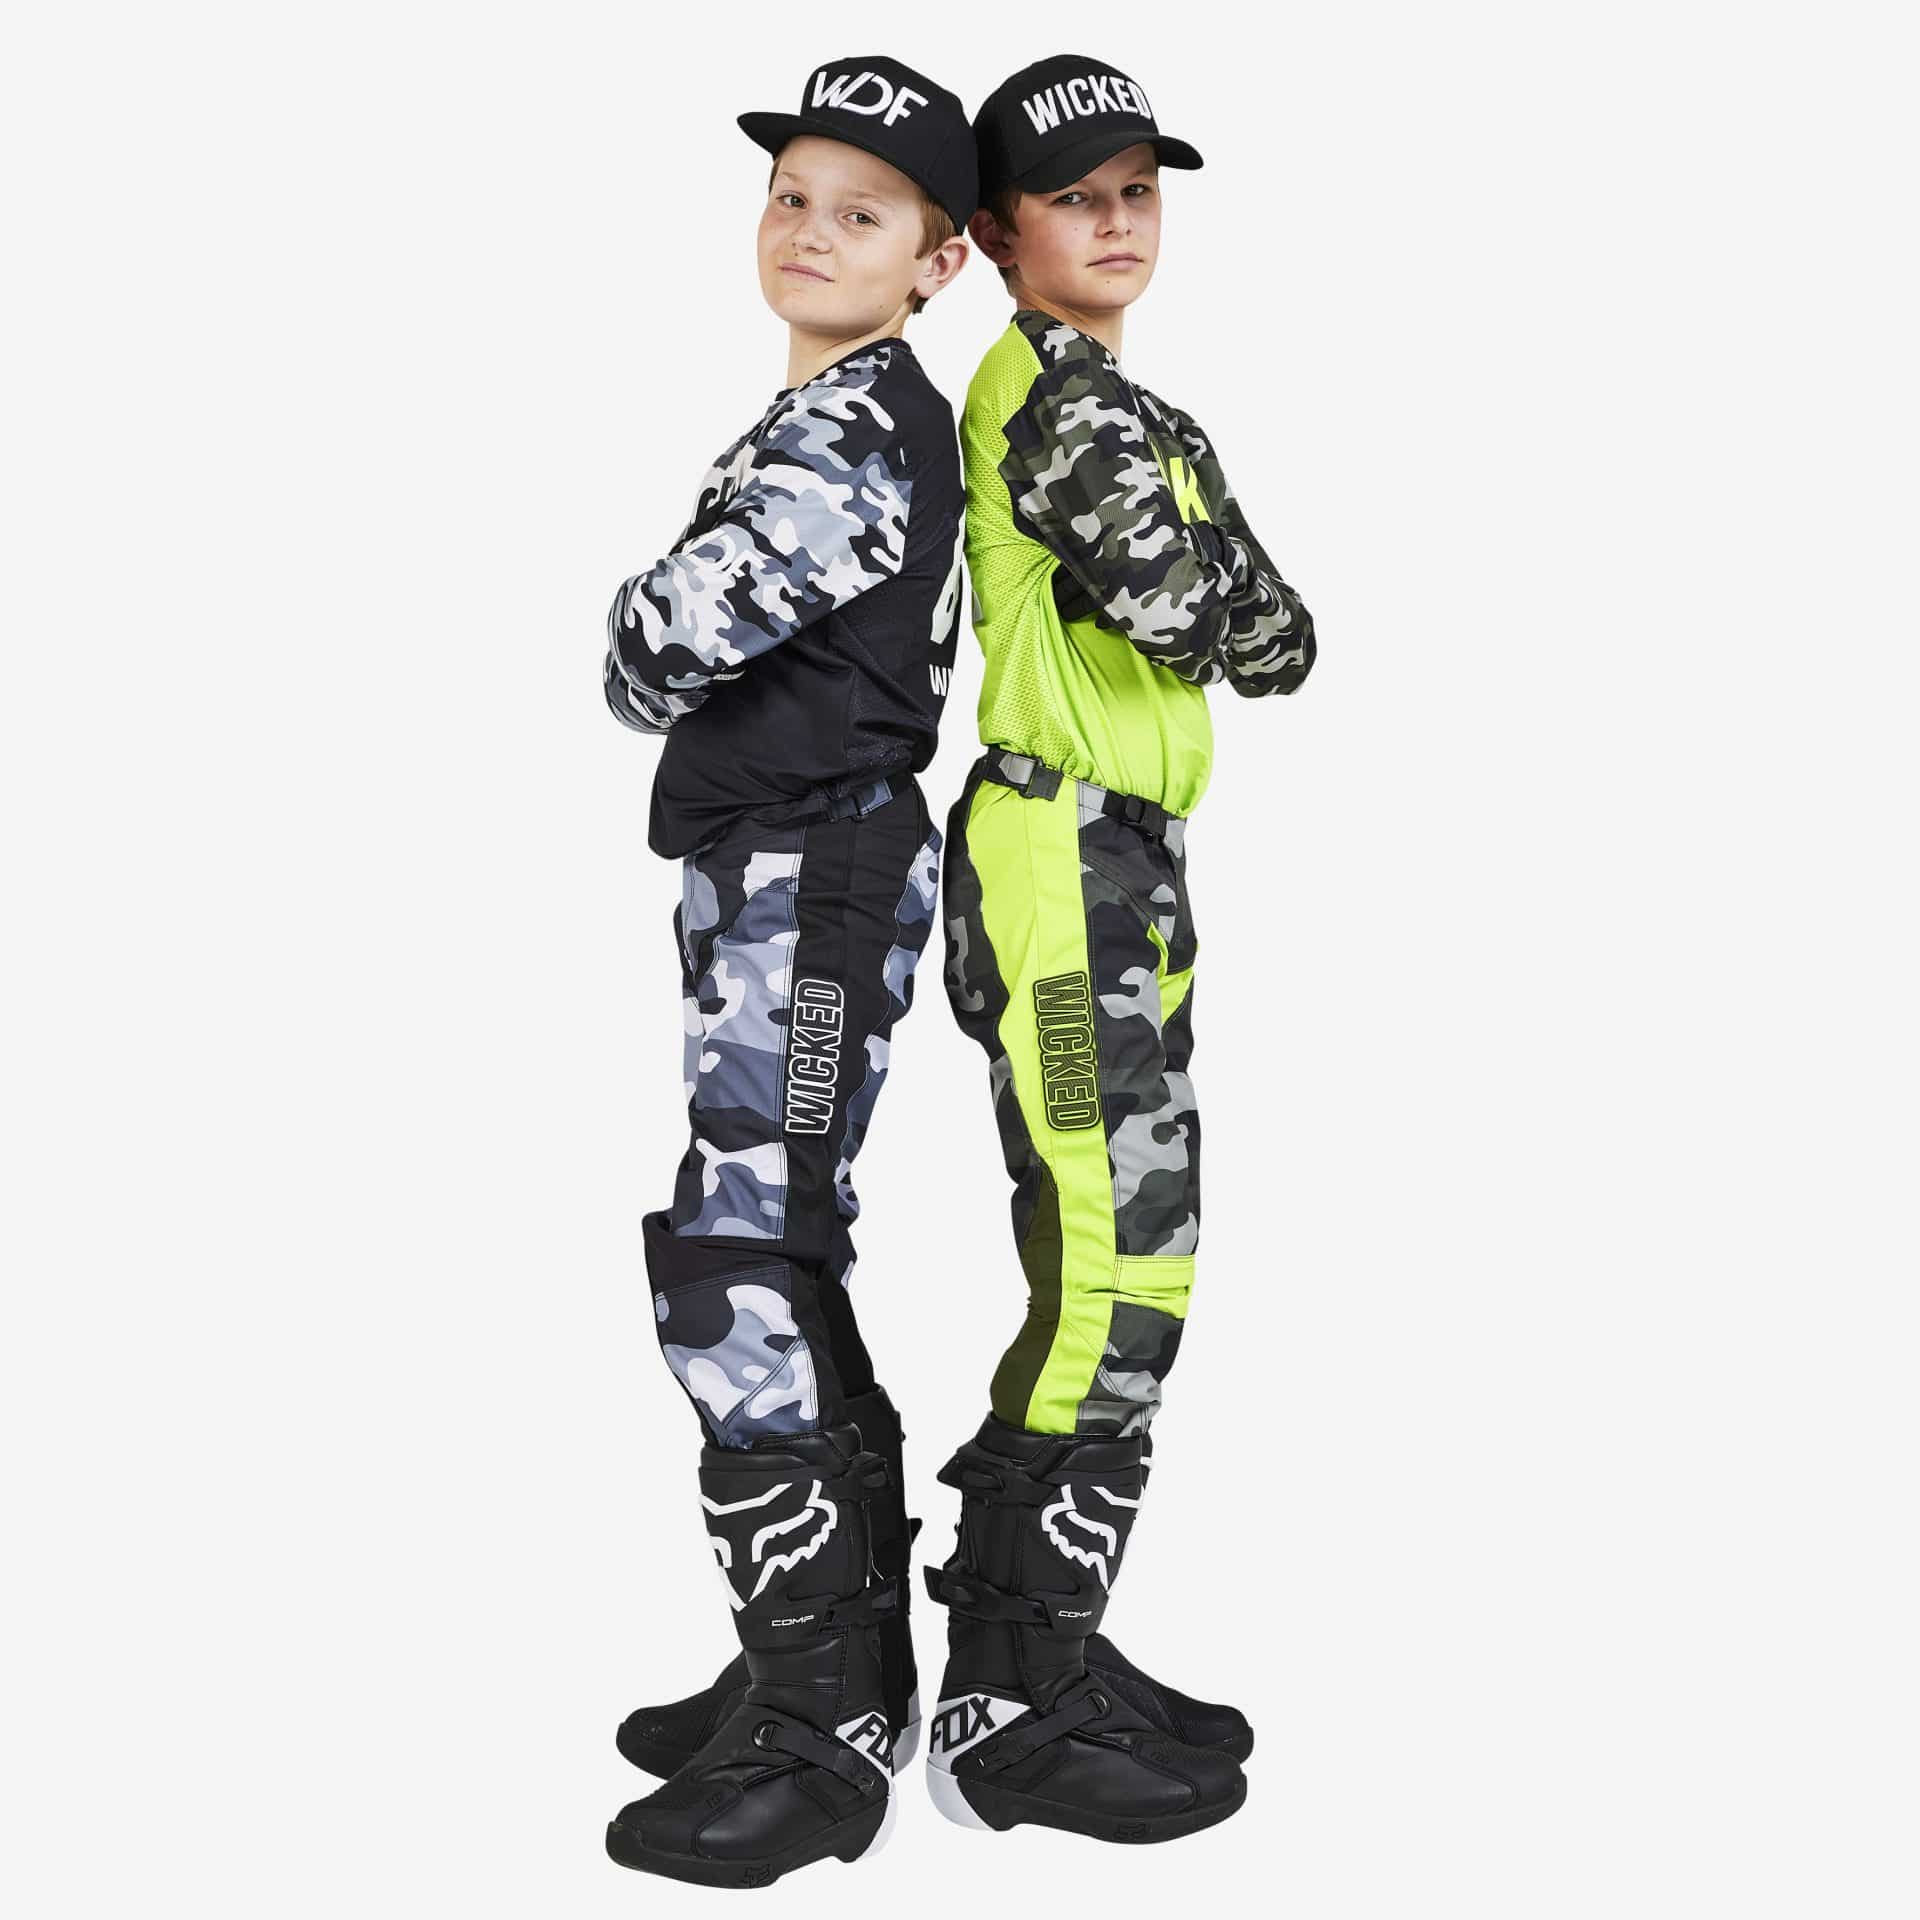 Camouflage Mx gear youth